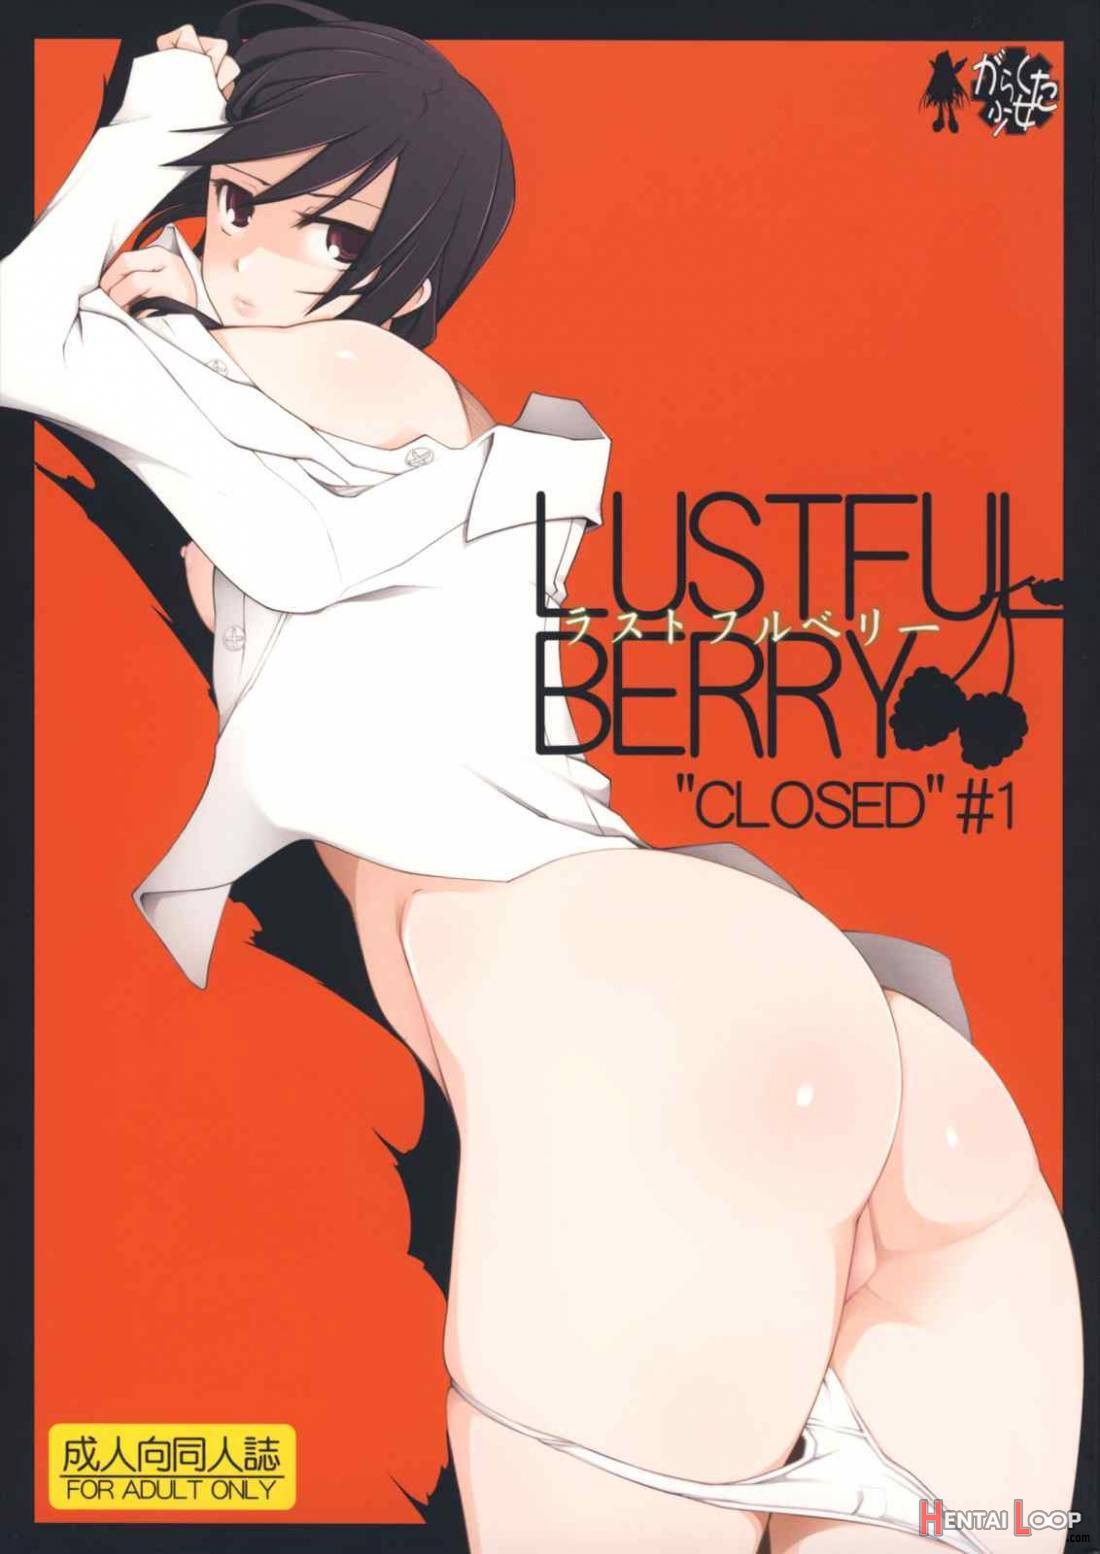 Lustful Berry“closed"#1 page 1